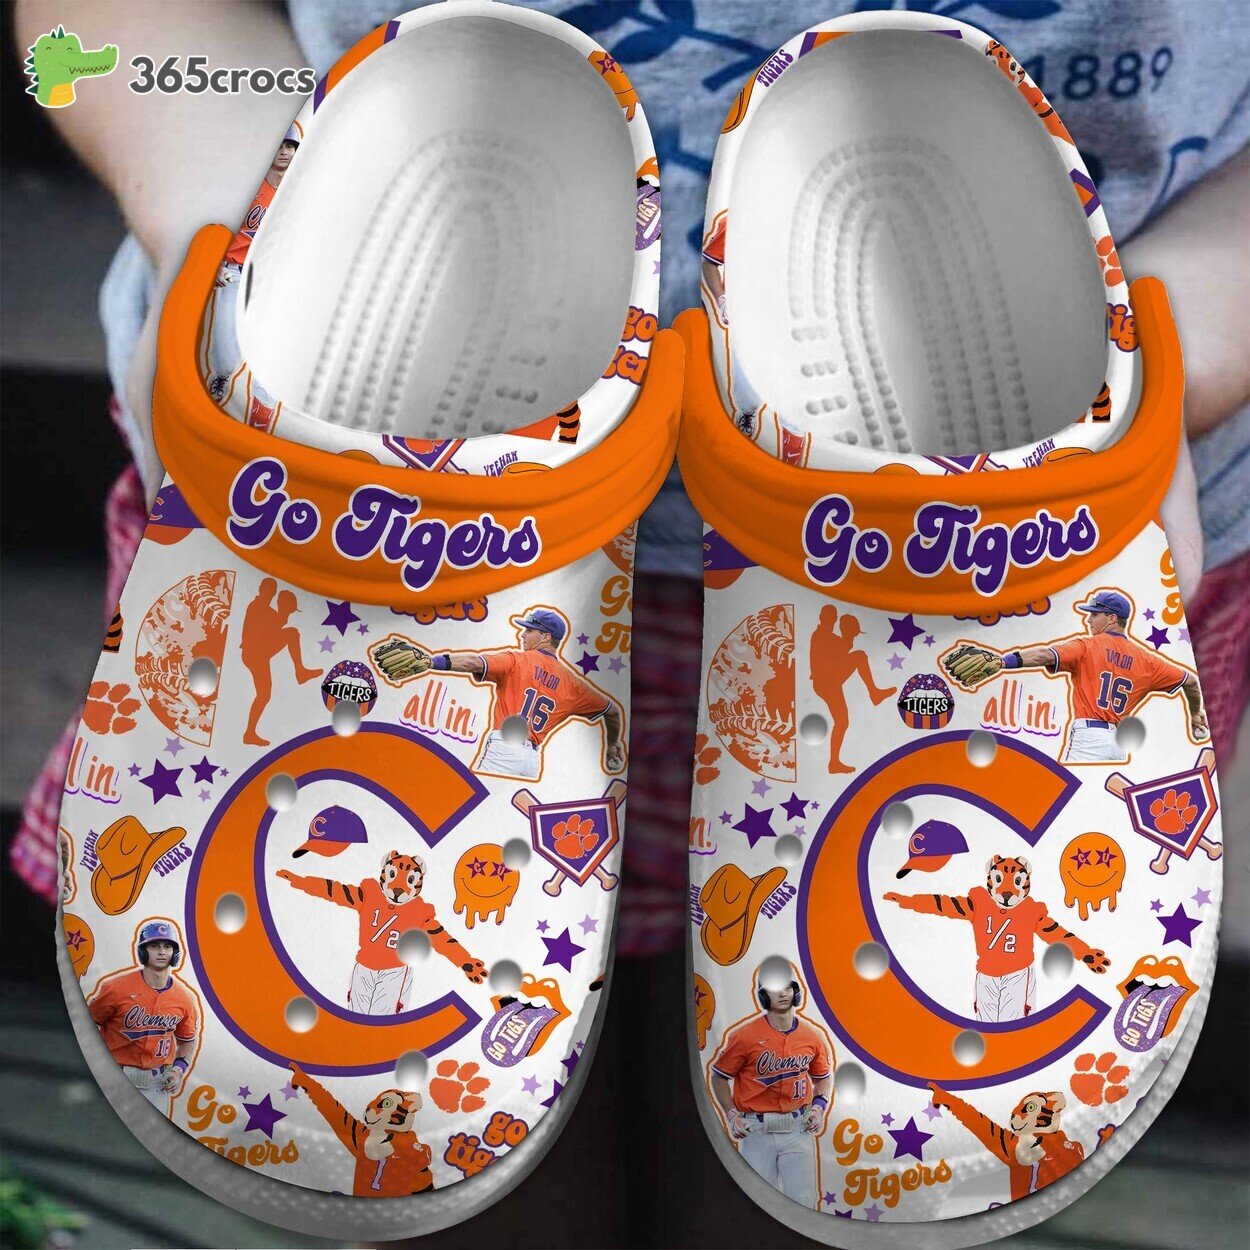 Clemson Tigers NCAA Sport Edition Two Comfortable Crocss Clogs Shoes Football Fans